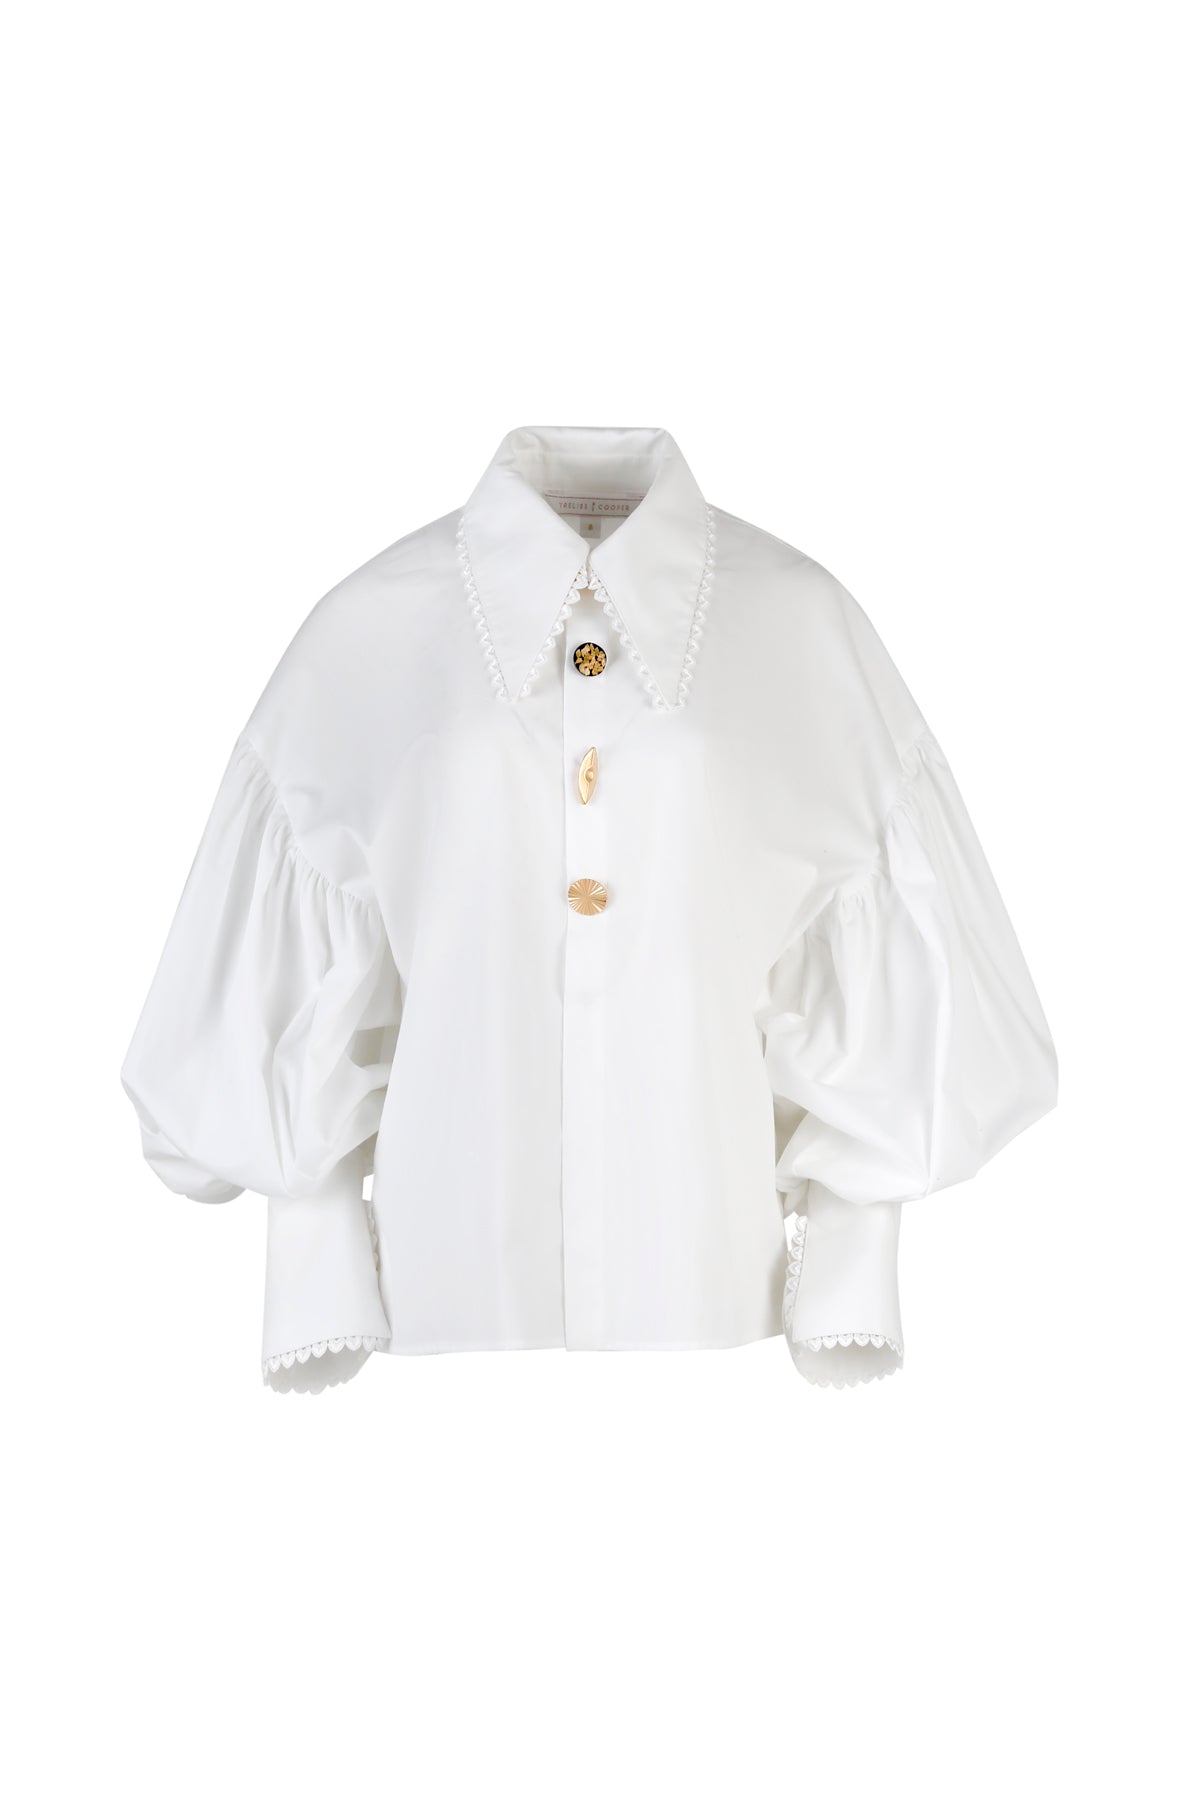 Shop To The Point Cotton Shirt - Trelise Cooper